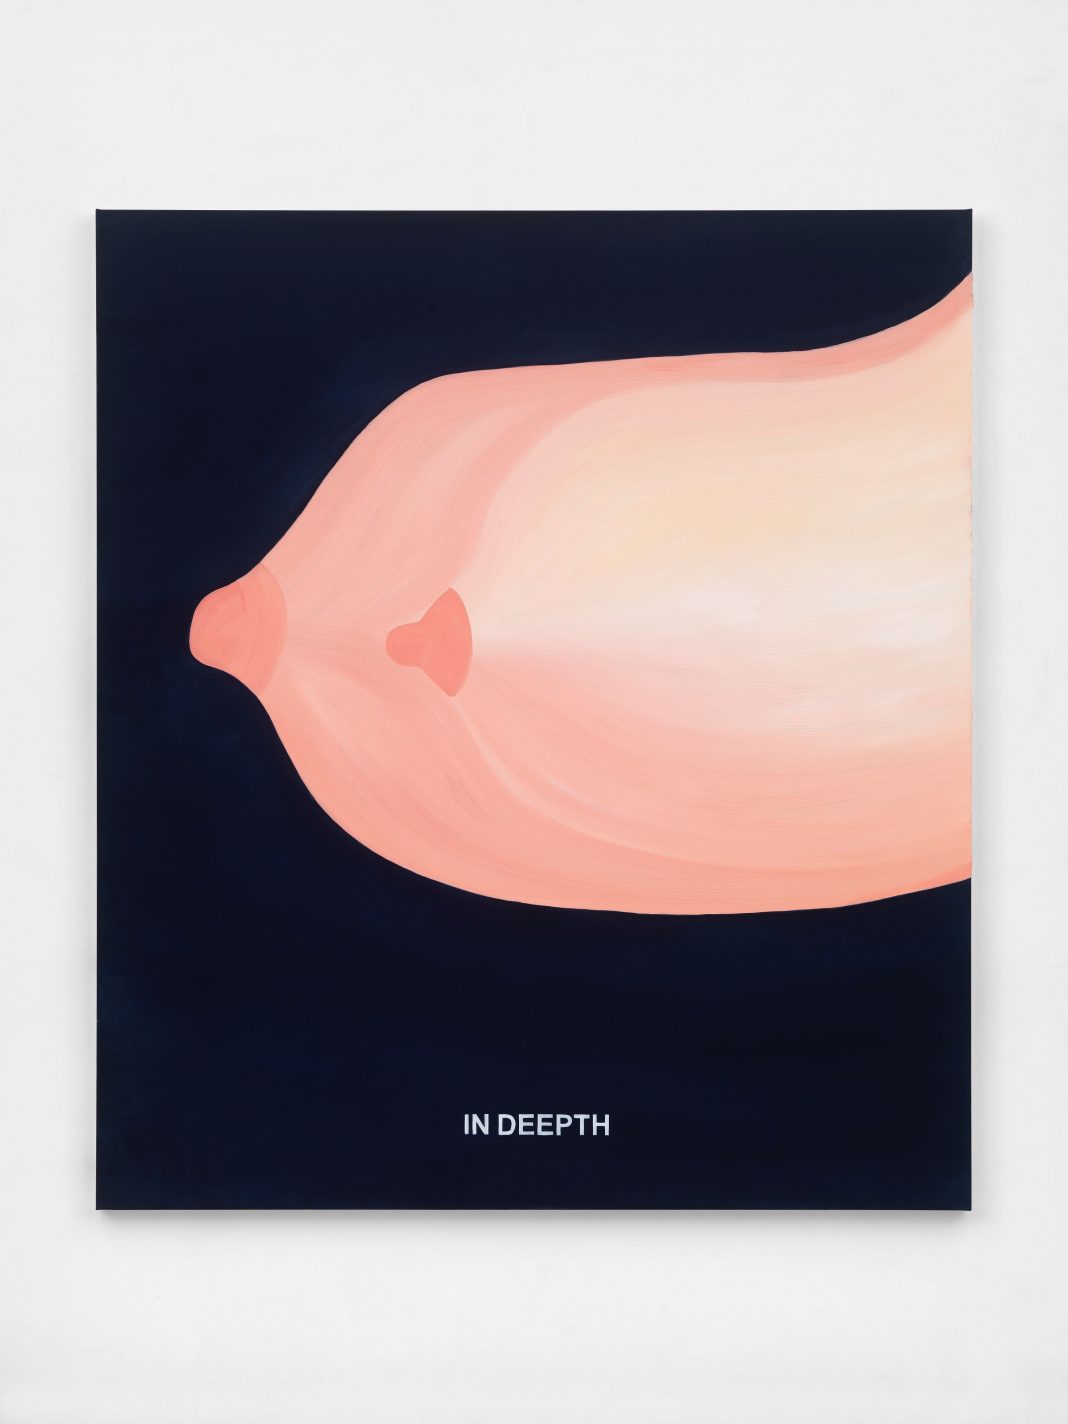 Breastshttps://www.exibart.com/repository/media/formidable/11/img/96a/Breasts-credits-Laure-Prouvost-The-Hidden-Paintings-Grandma-Improved-In-Deepth-2023-©-Laure-Prouvost-and-Lisson-Gallery.-2-1068x1424.jpg